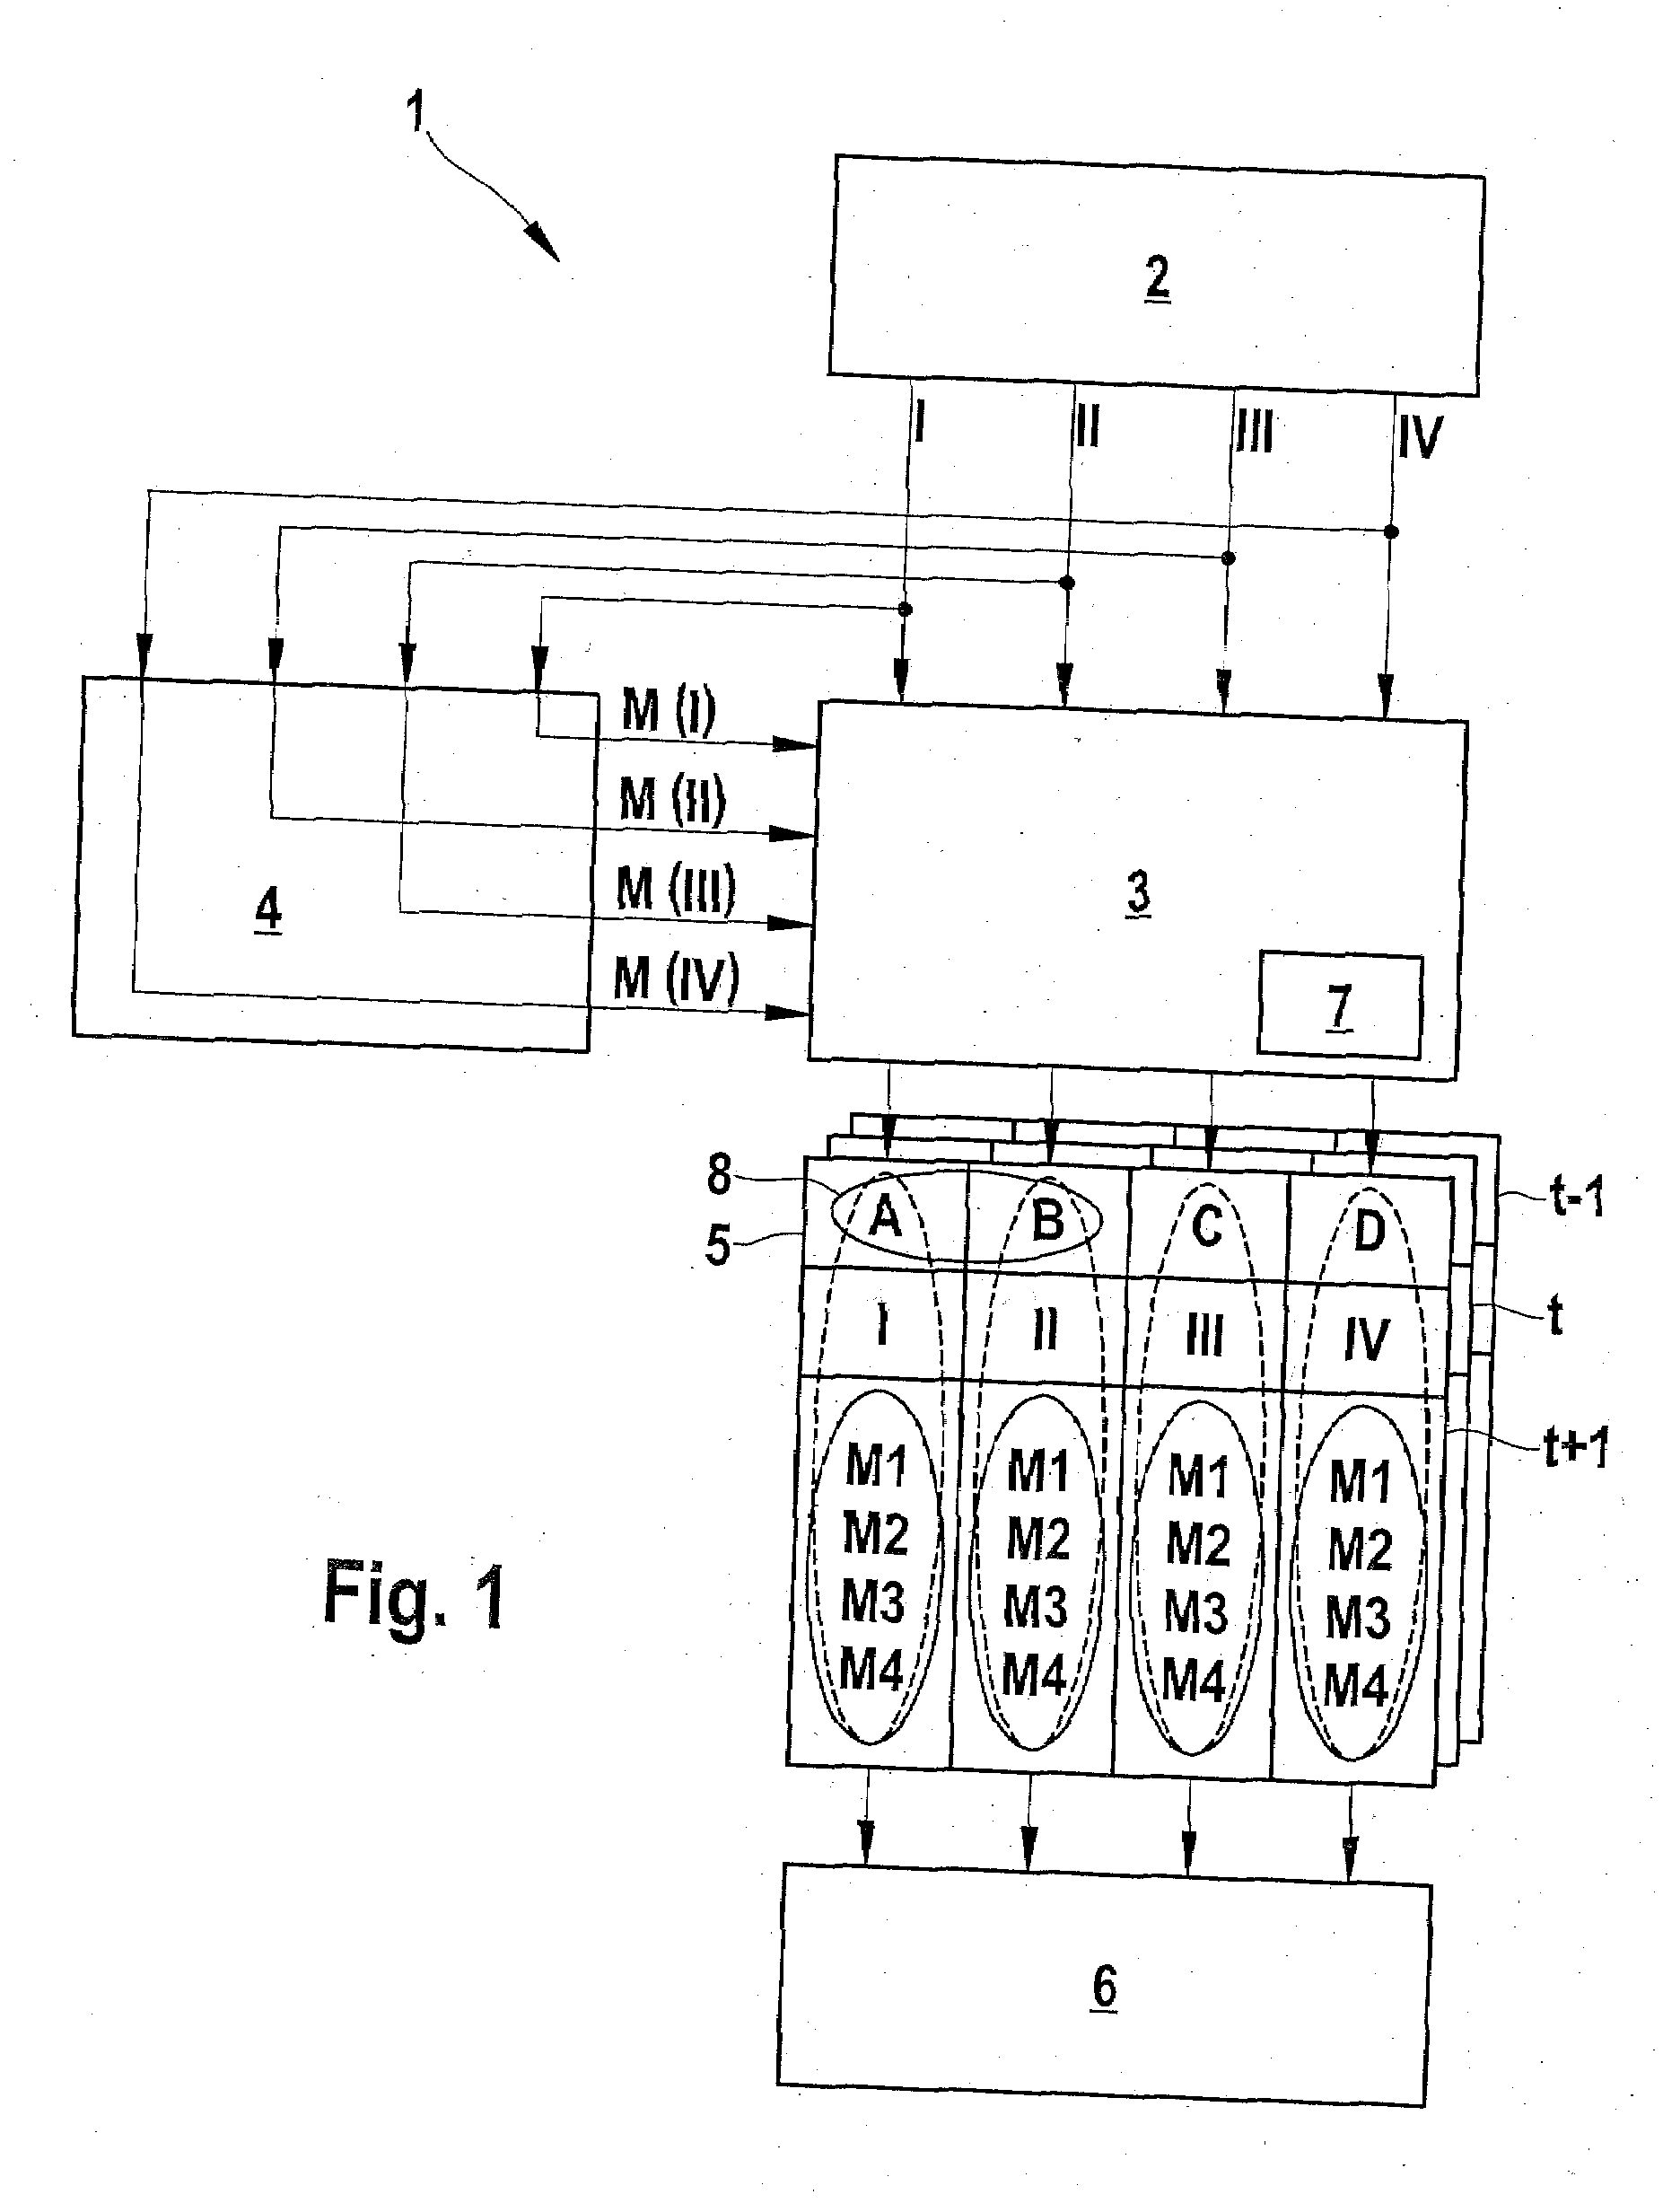 Apparatus, method and computer program for image-based tracking of surveillance objects